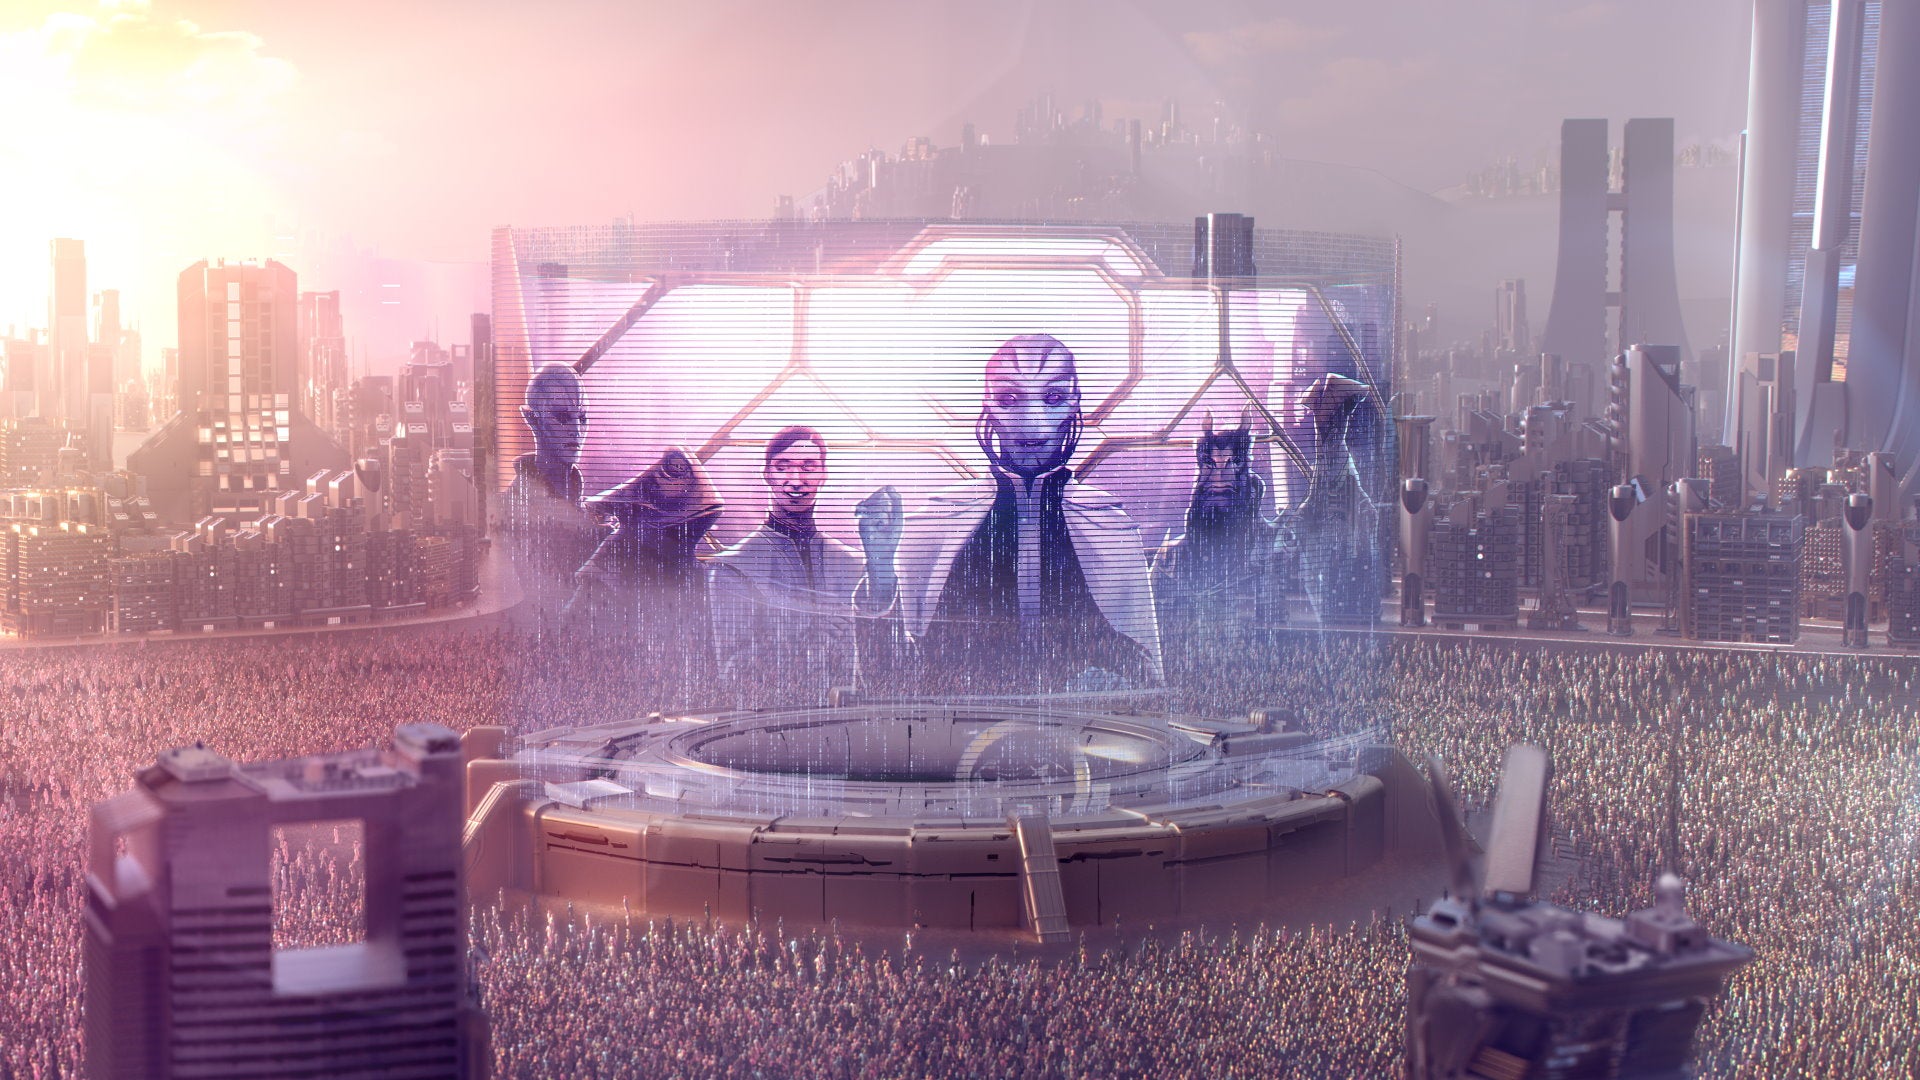 Hordes of people look up at a giant holographic screen of various alien ambassadors in Stellaris' Federation cover art.